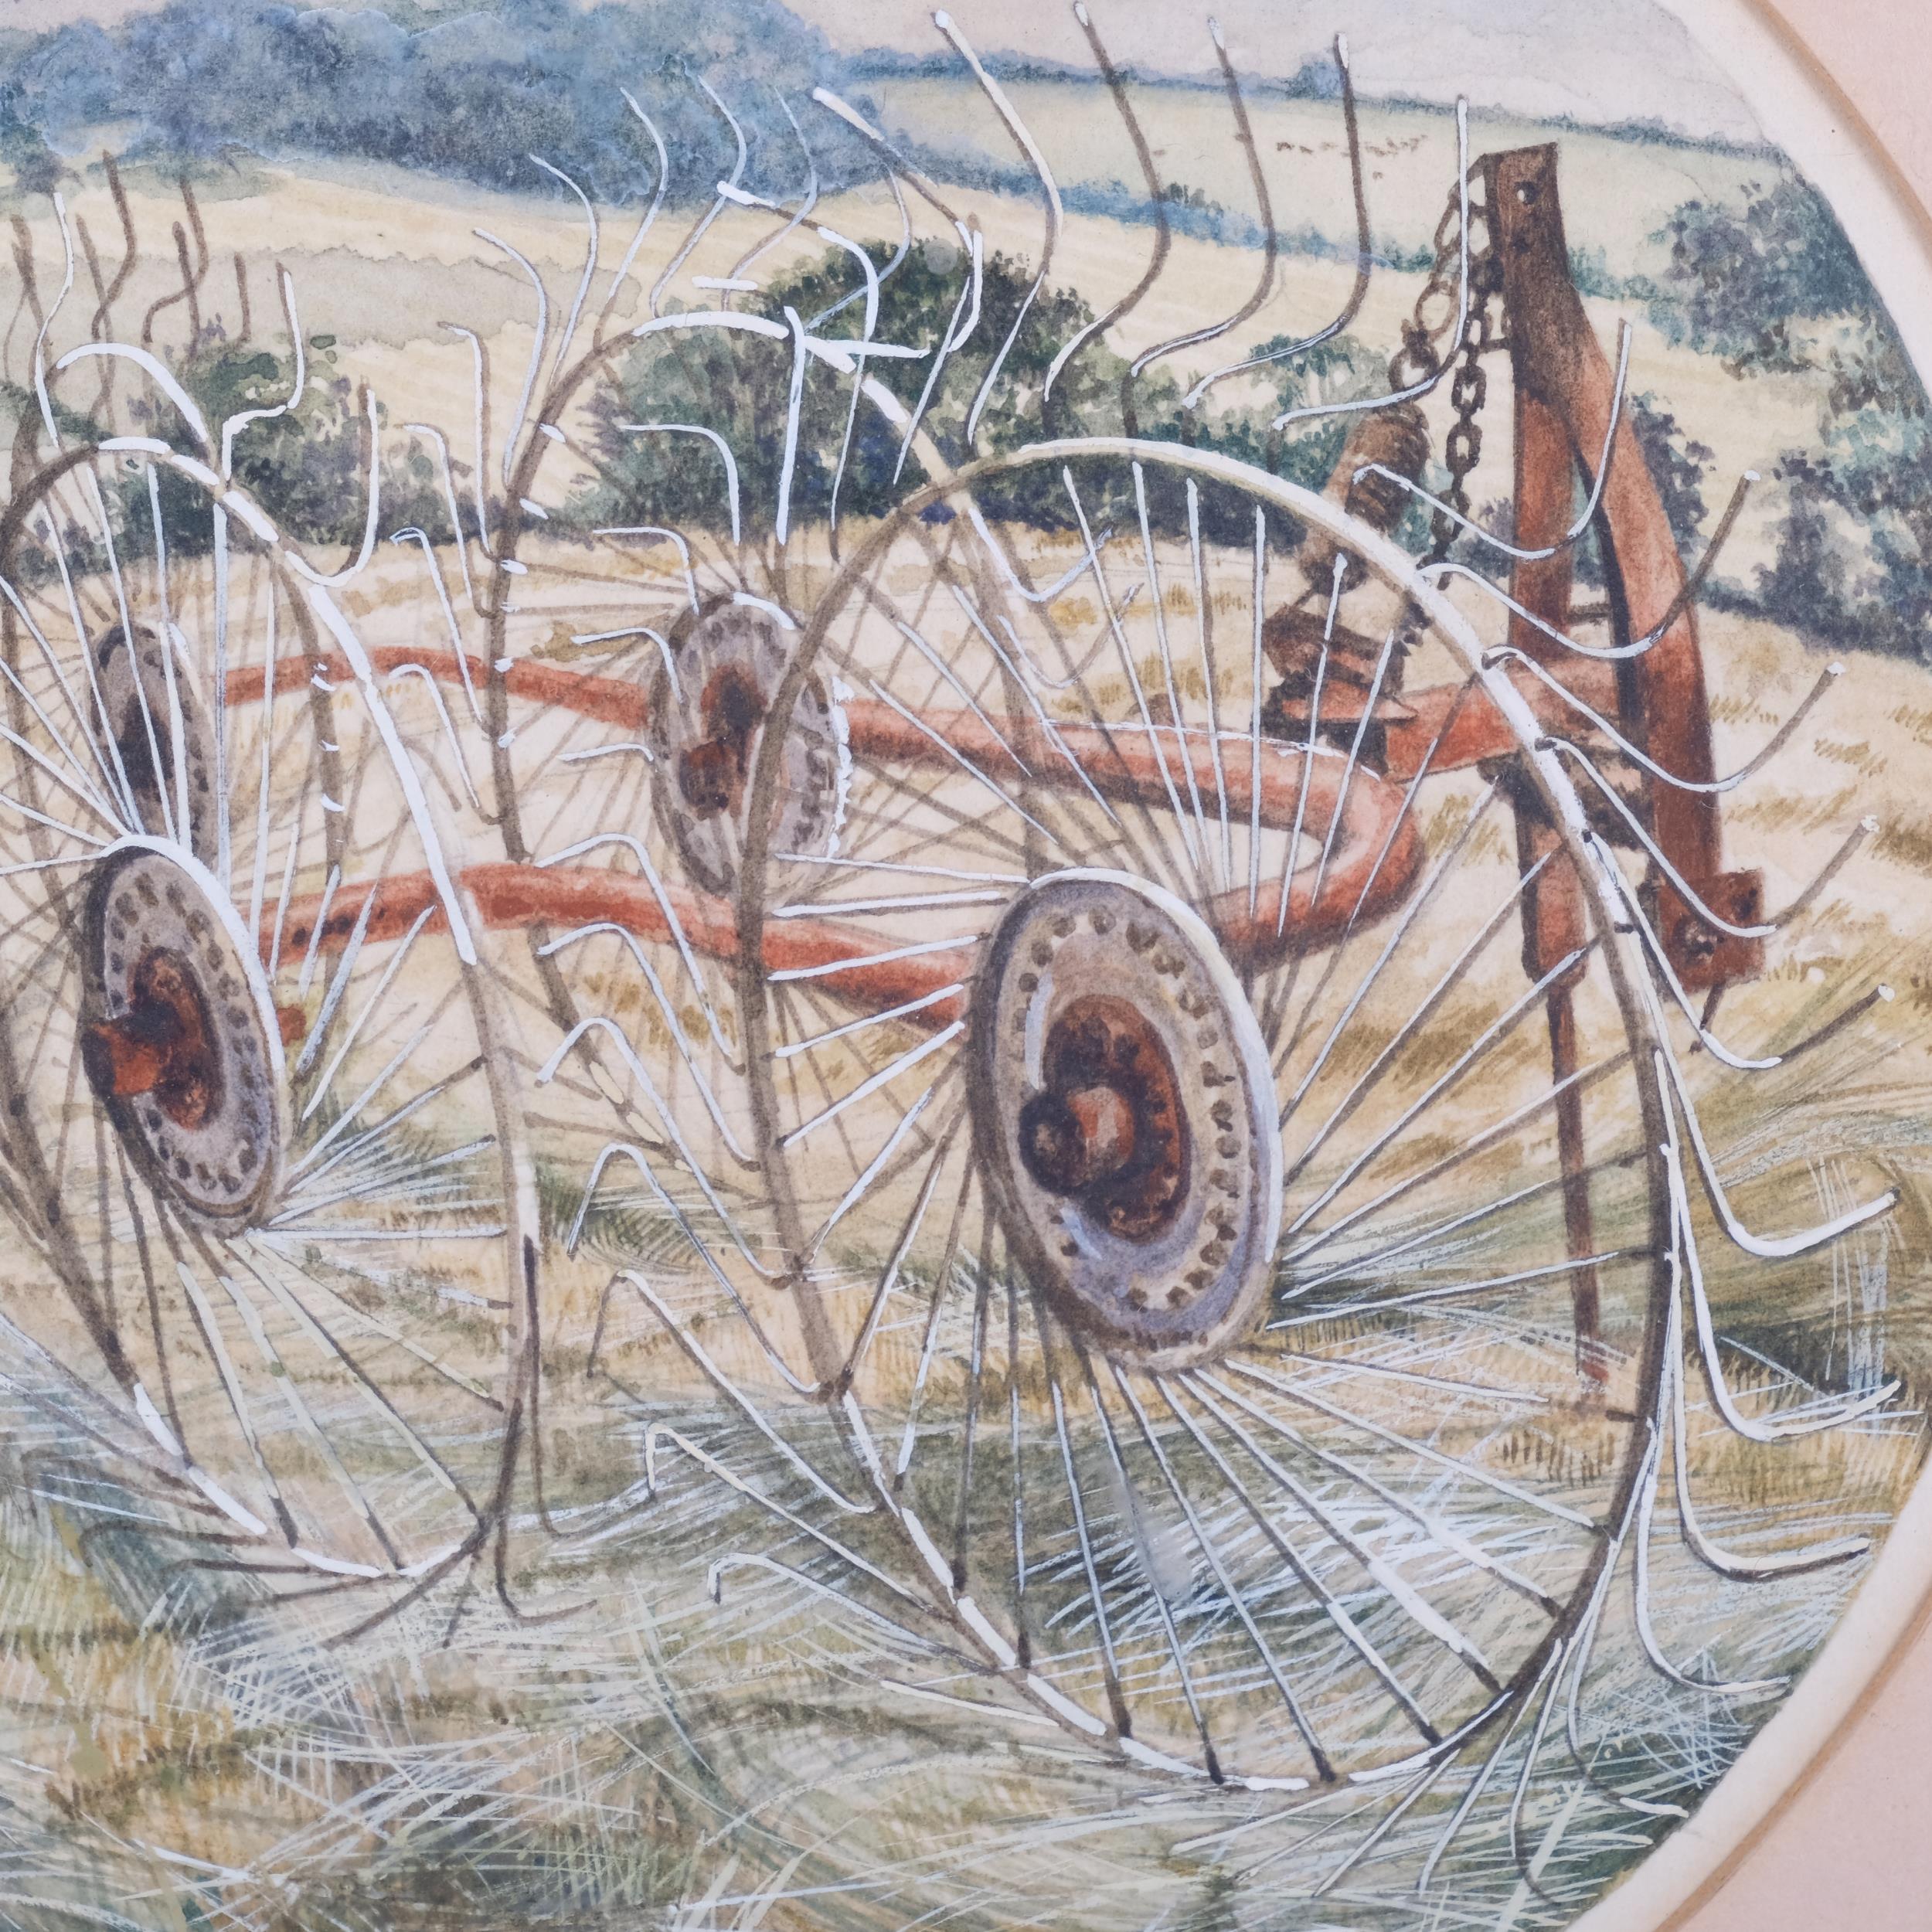 David Hobbs, farm machinery, circular watercolour, signed and dated 1980, image 11cm across, - Image 3 of 4